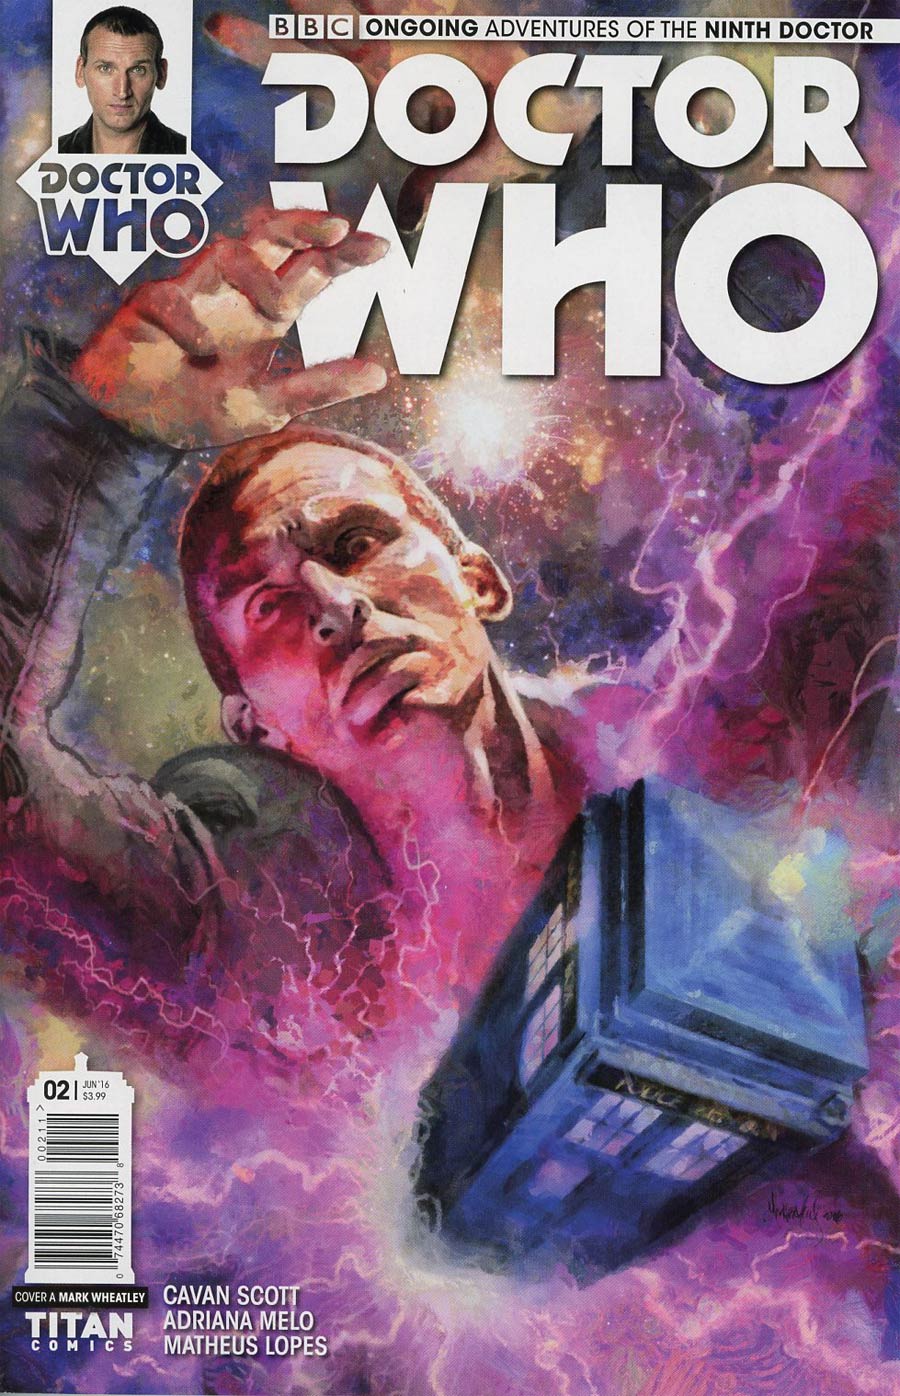 Doctor Who 9th Doctor Vol 2 #2 Cover A Regular Mark Wheatley Cover